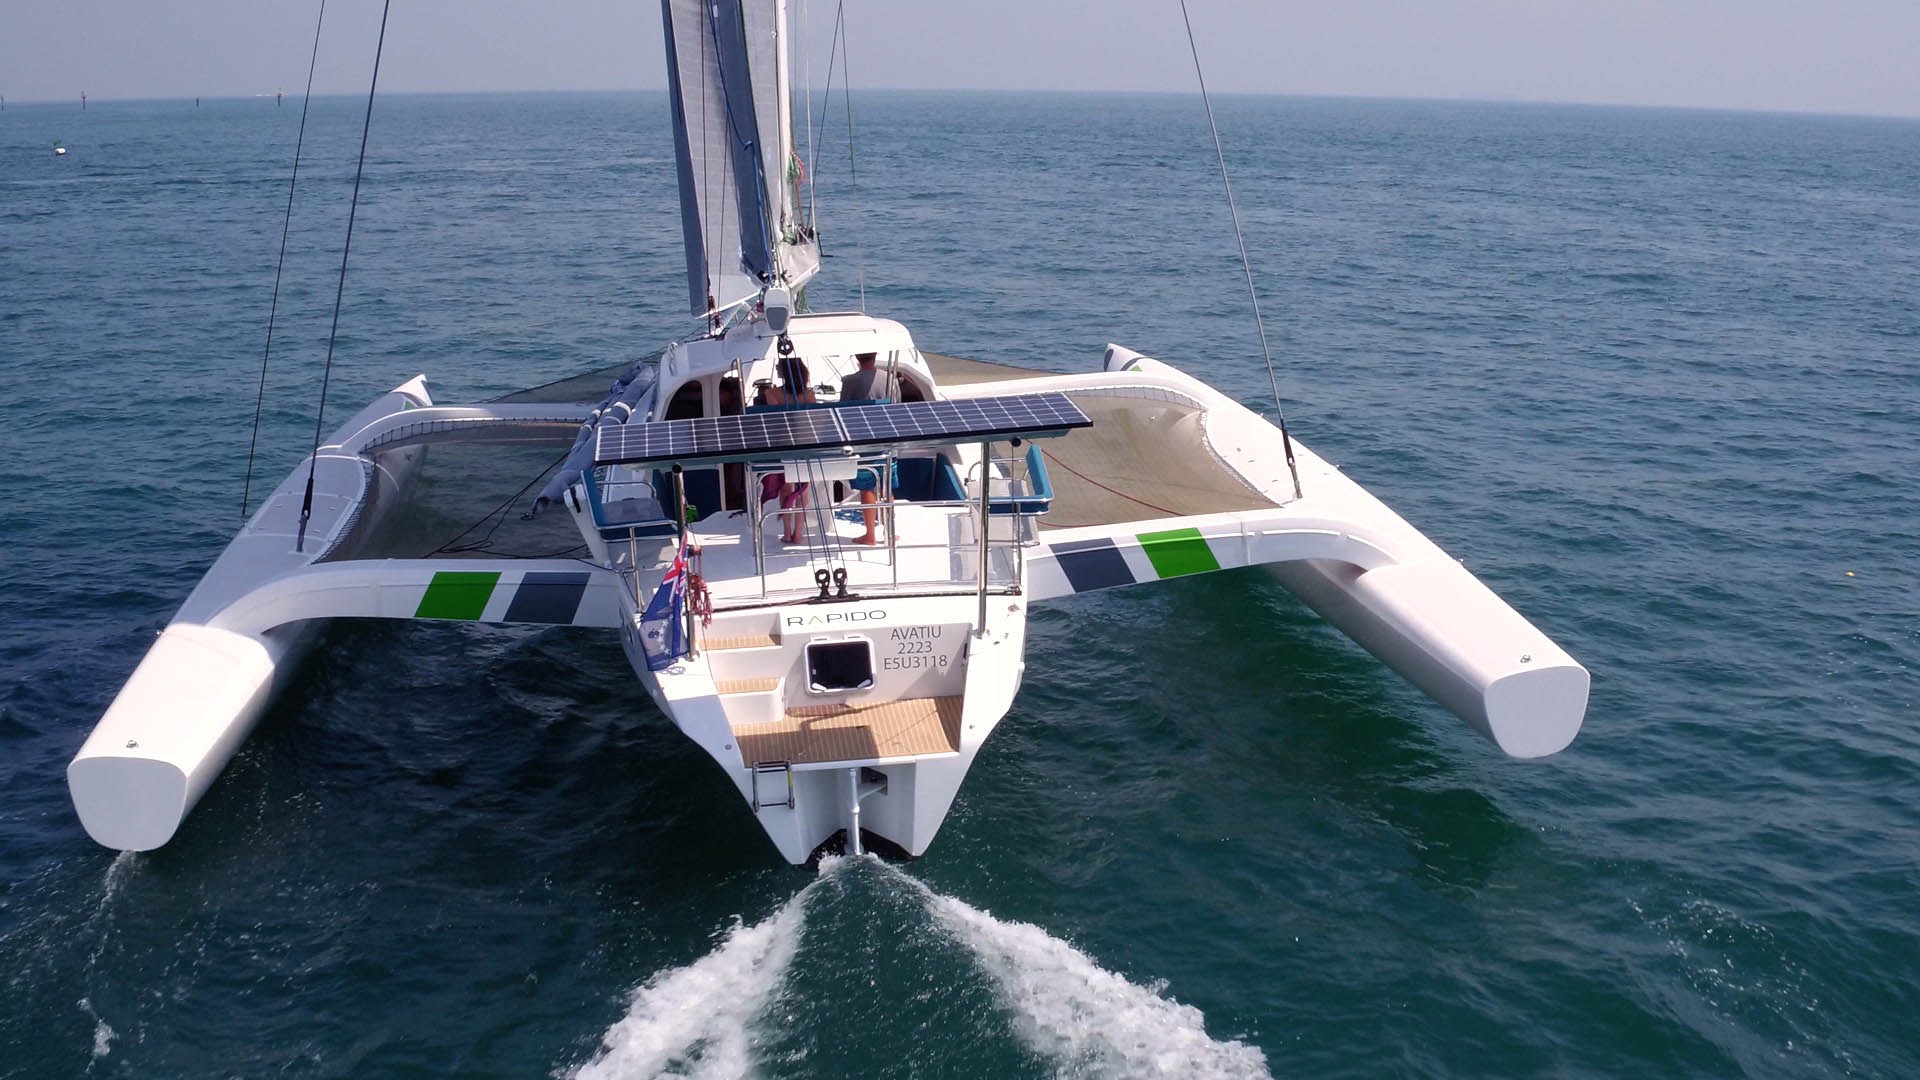 New Sail Trimaran for Sale  60 Boat Highlights